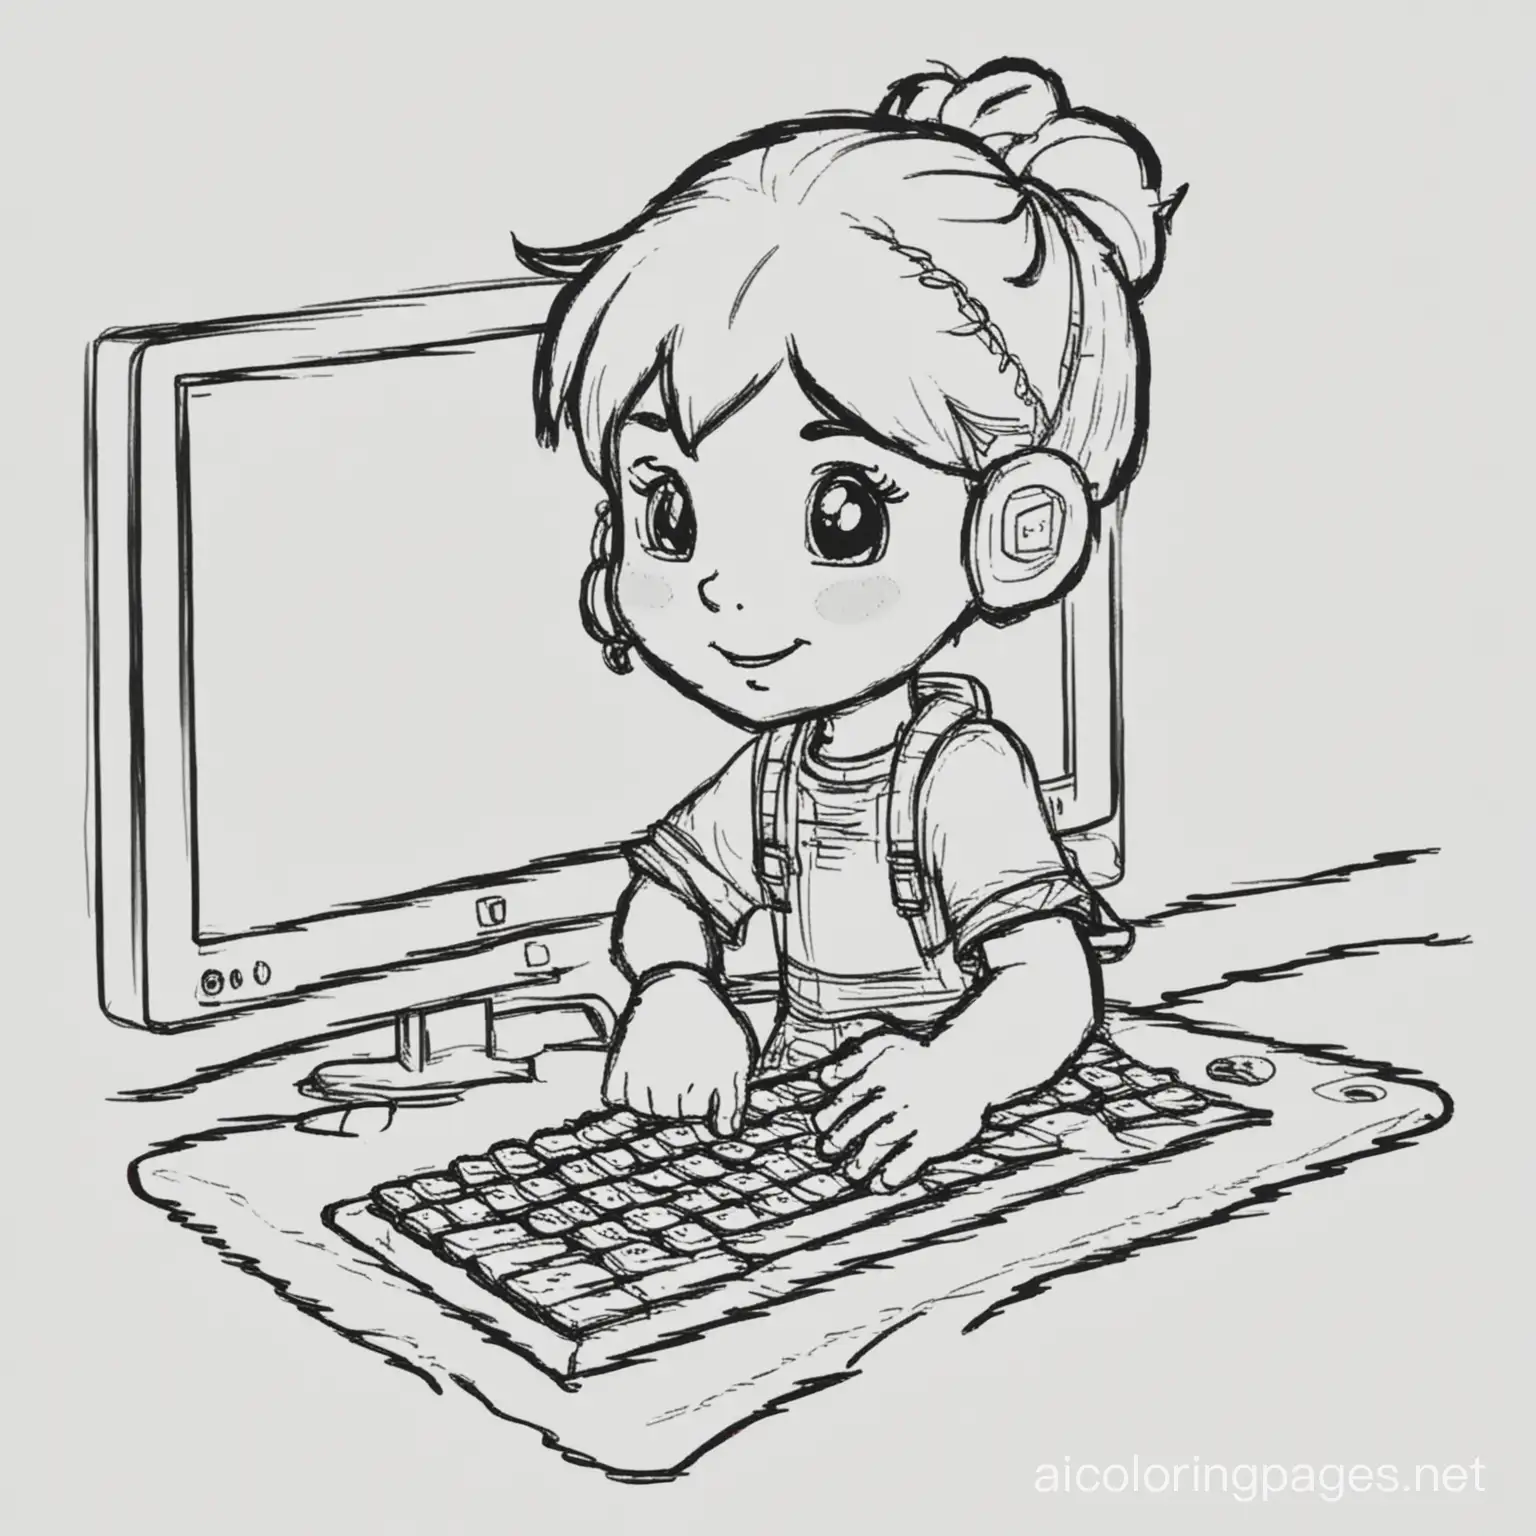 playing computer games, Coloring Page, black and white, line art, white background, Simplicity, Ample White Space. The background of the coloring page is plain white to make it easy for young children to color within the lines. The outlines of all the subjects are easy to distinguish, making it simple for kids to color without too much difficulty